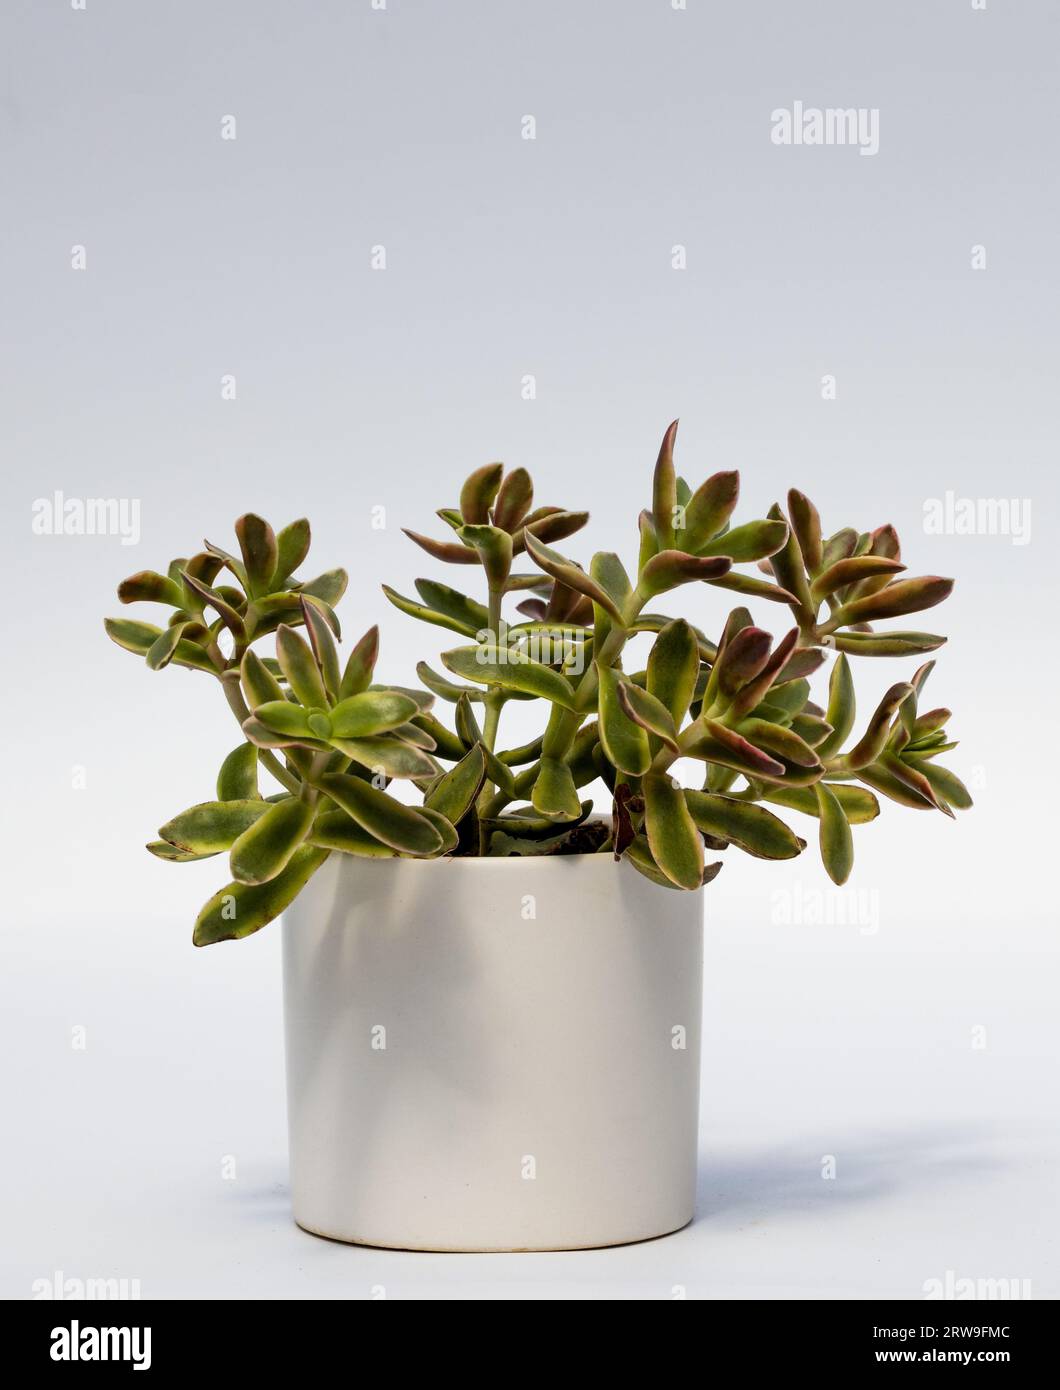 Indoor plant in a flower pot, isolated on a white background. Sedum Adolphii,  Crassulaceae Stock Photo